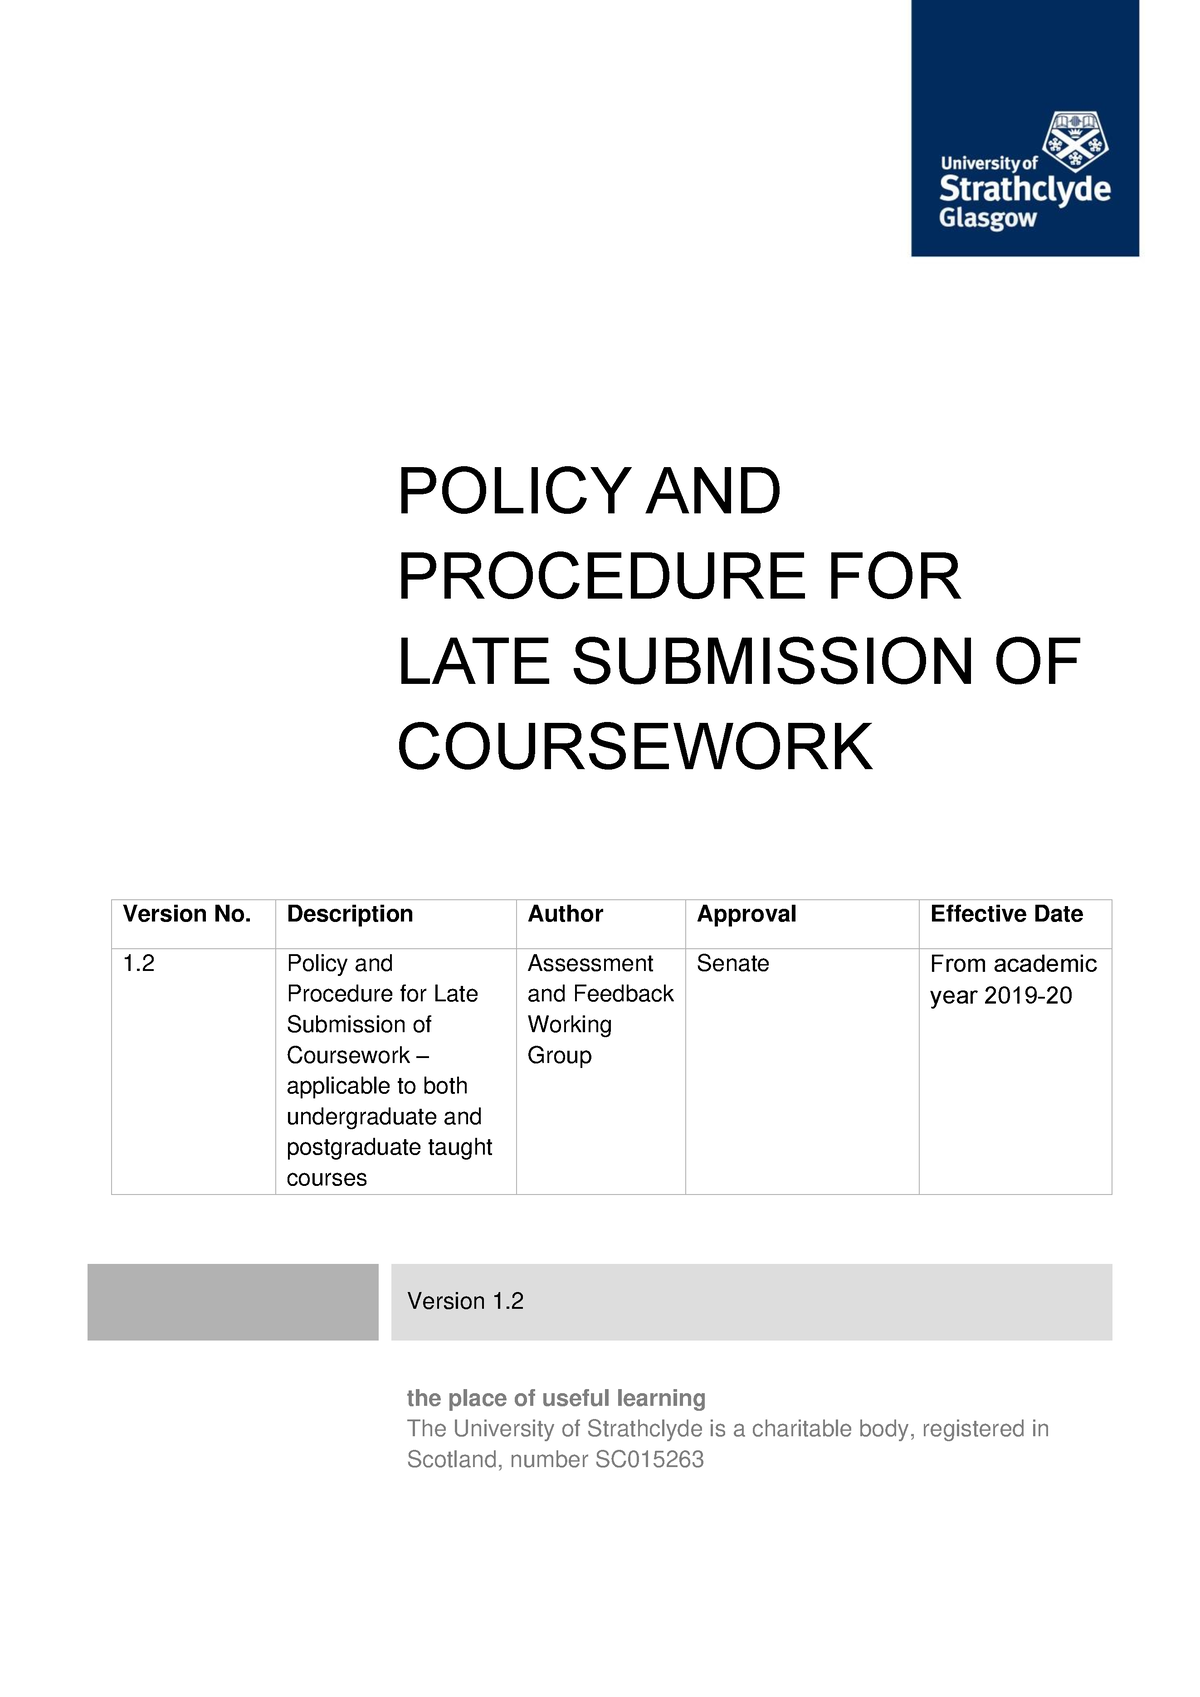 coursework submission policy